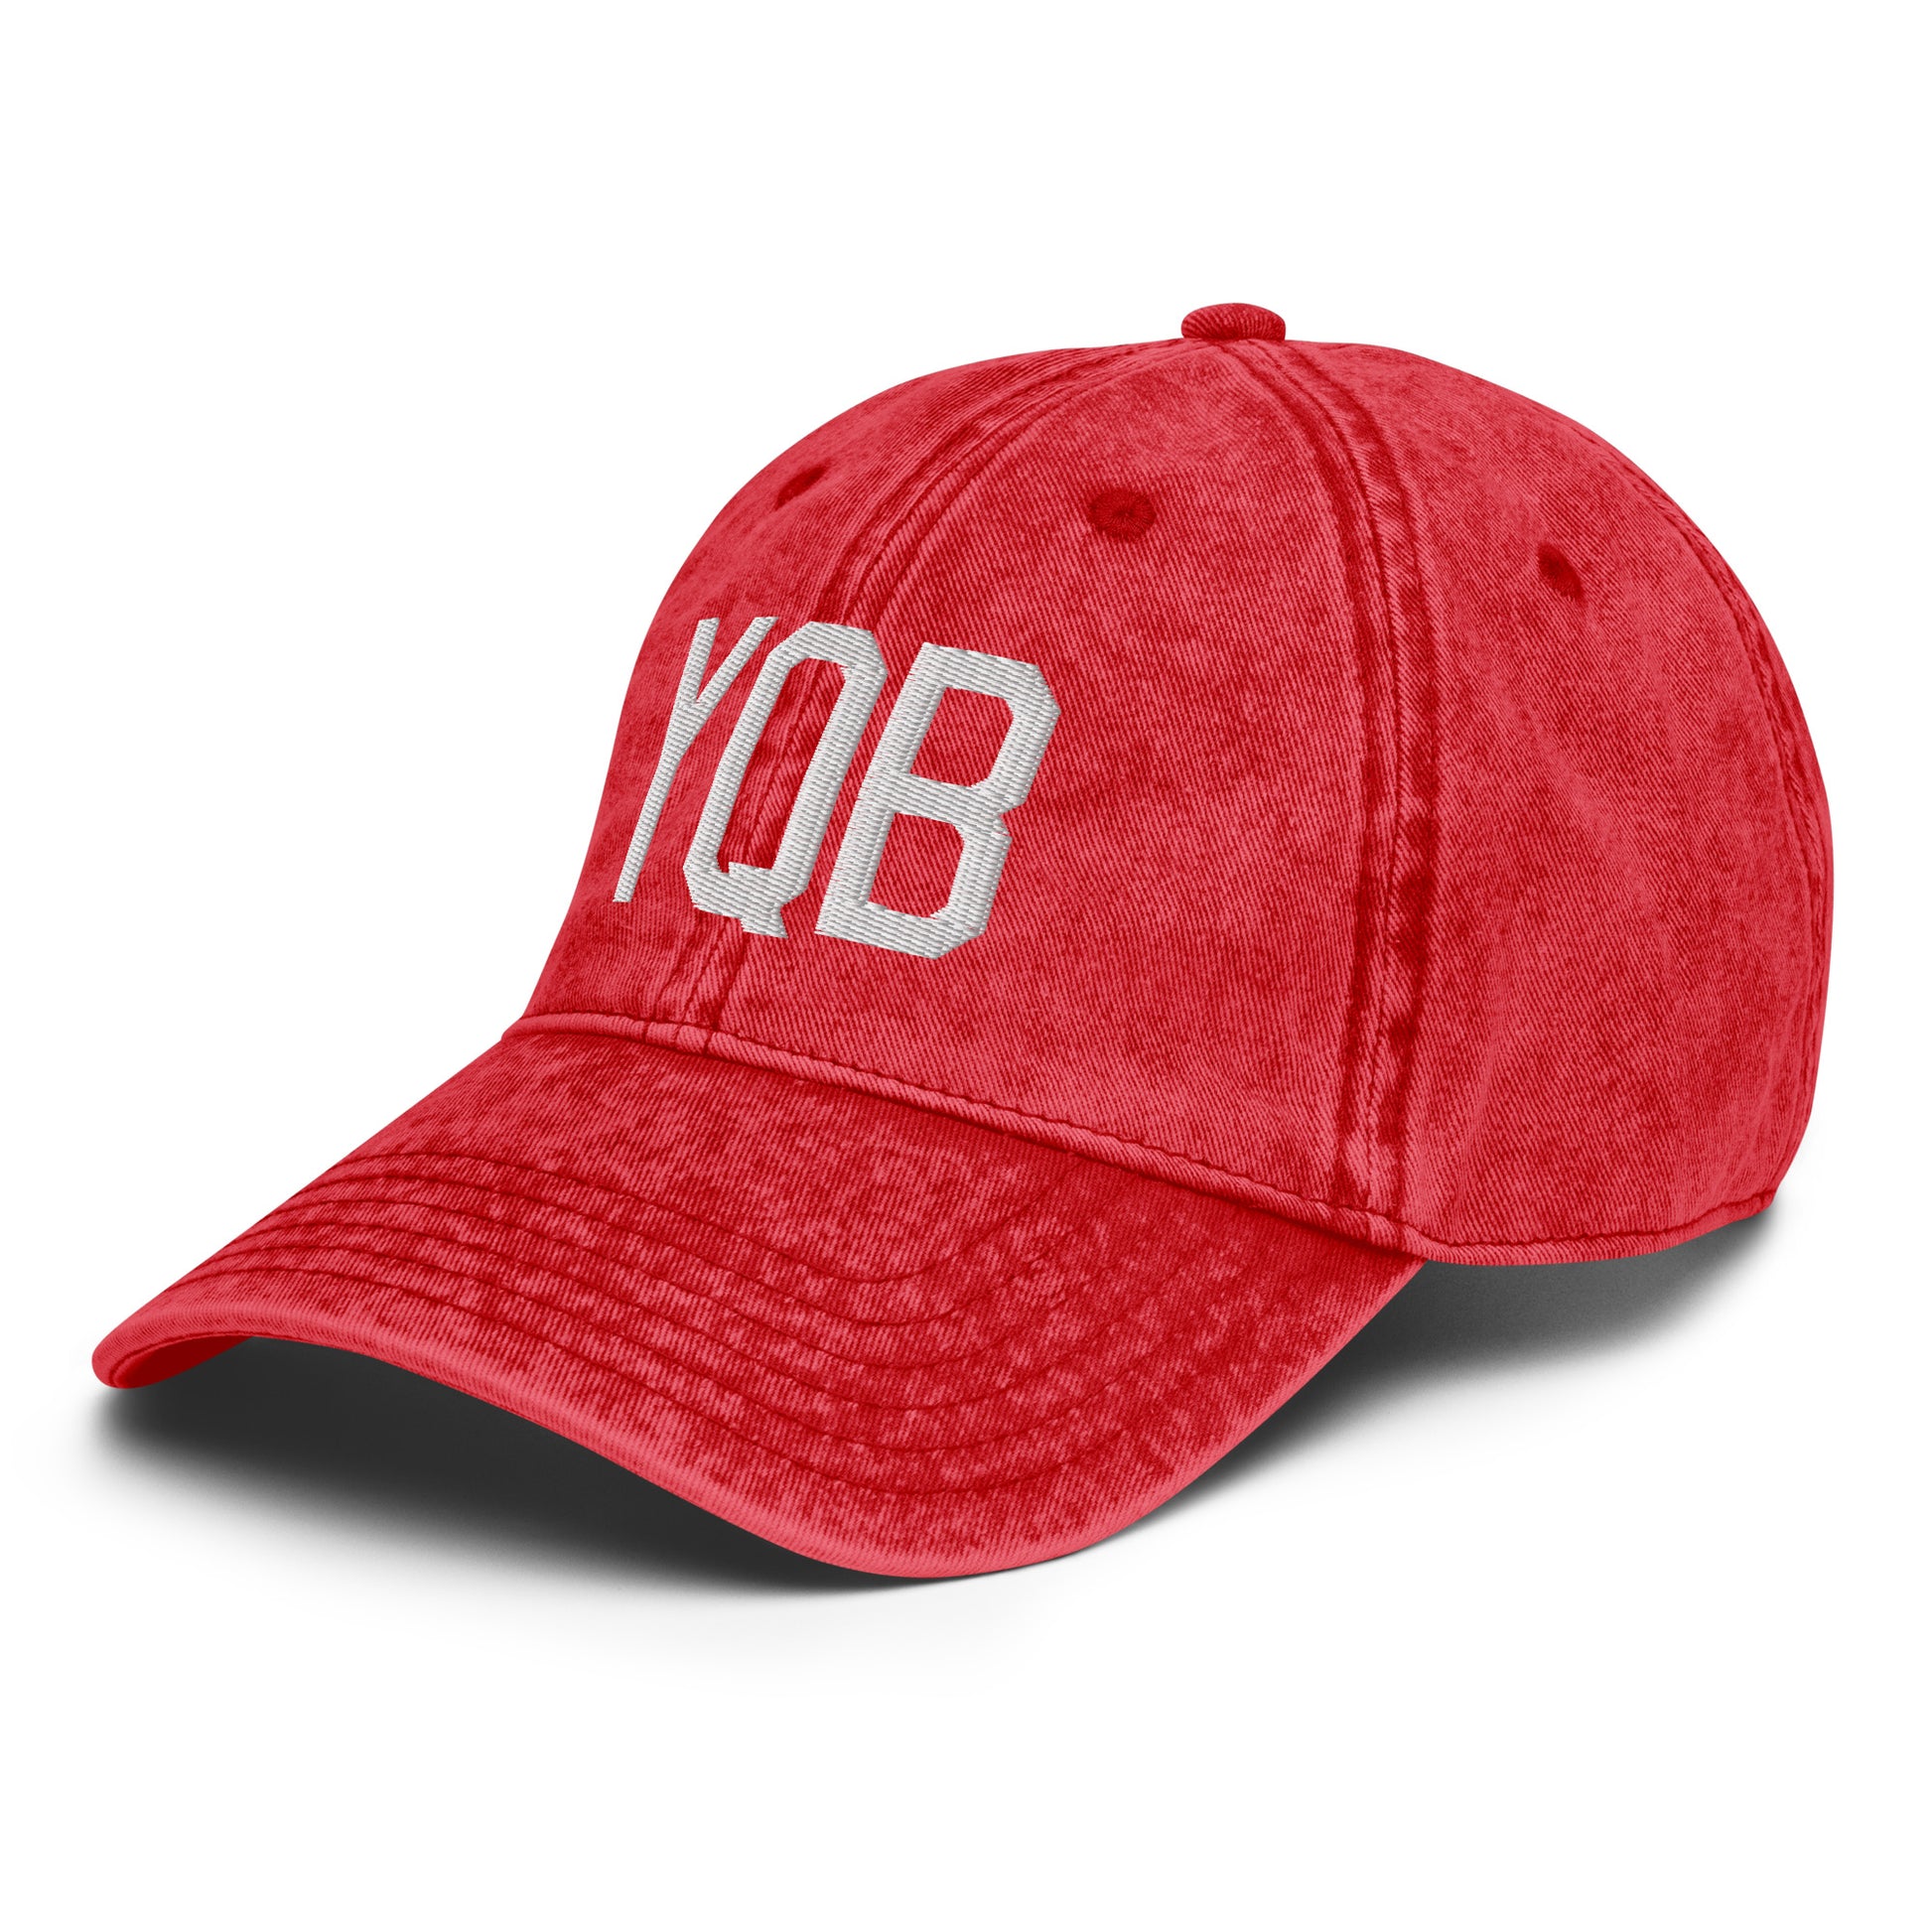 Airport Code Twill Cap - White • YQB Quebec City • YHM Designs - Image 23